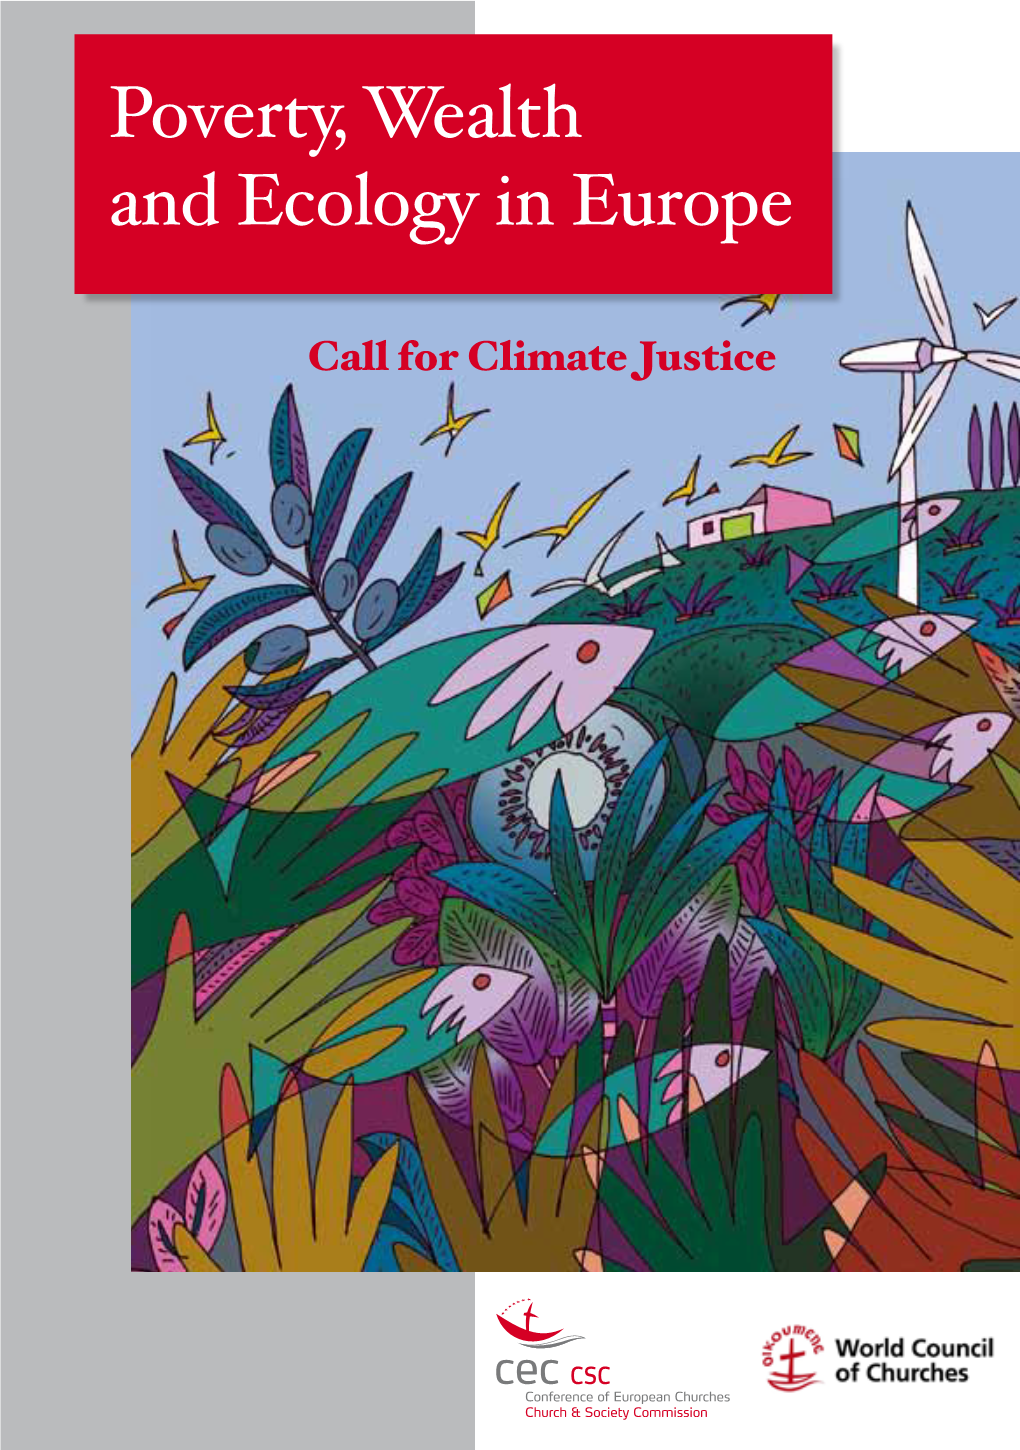 Poverty, Wealth and Ecology in Europe